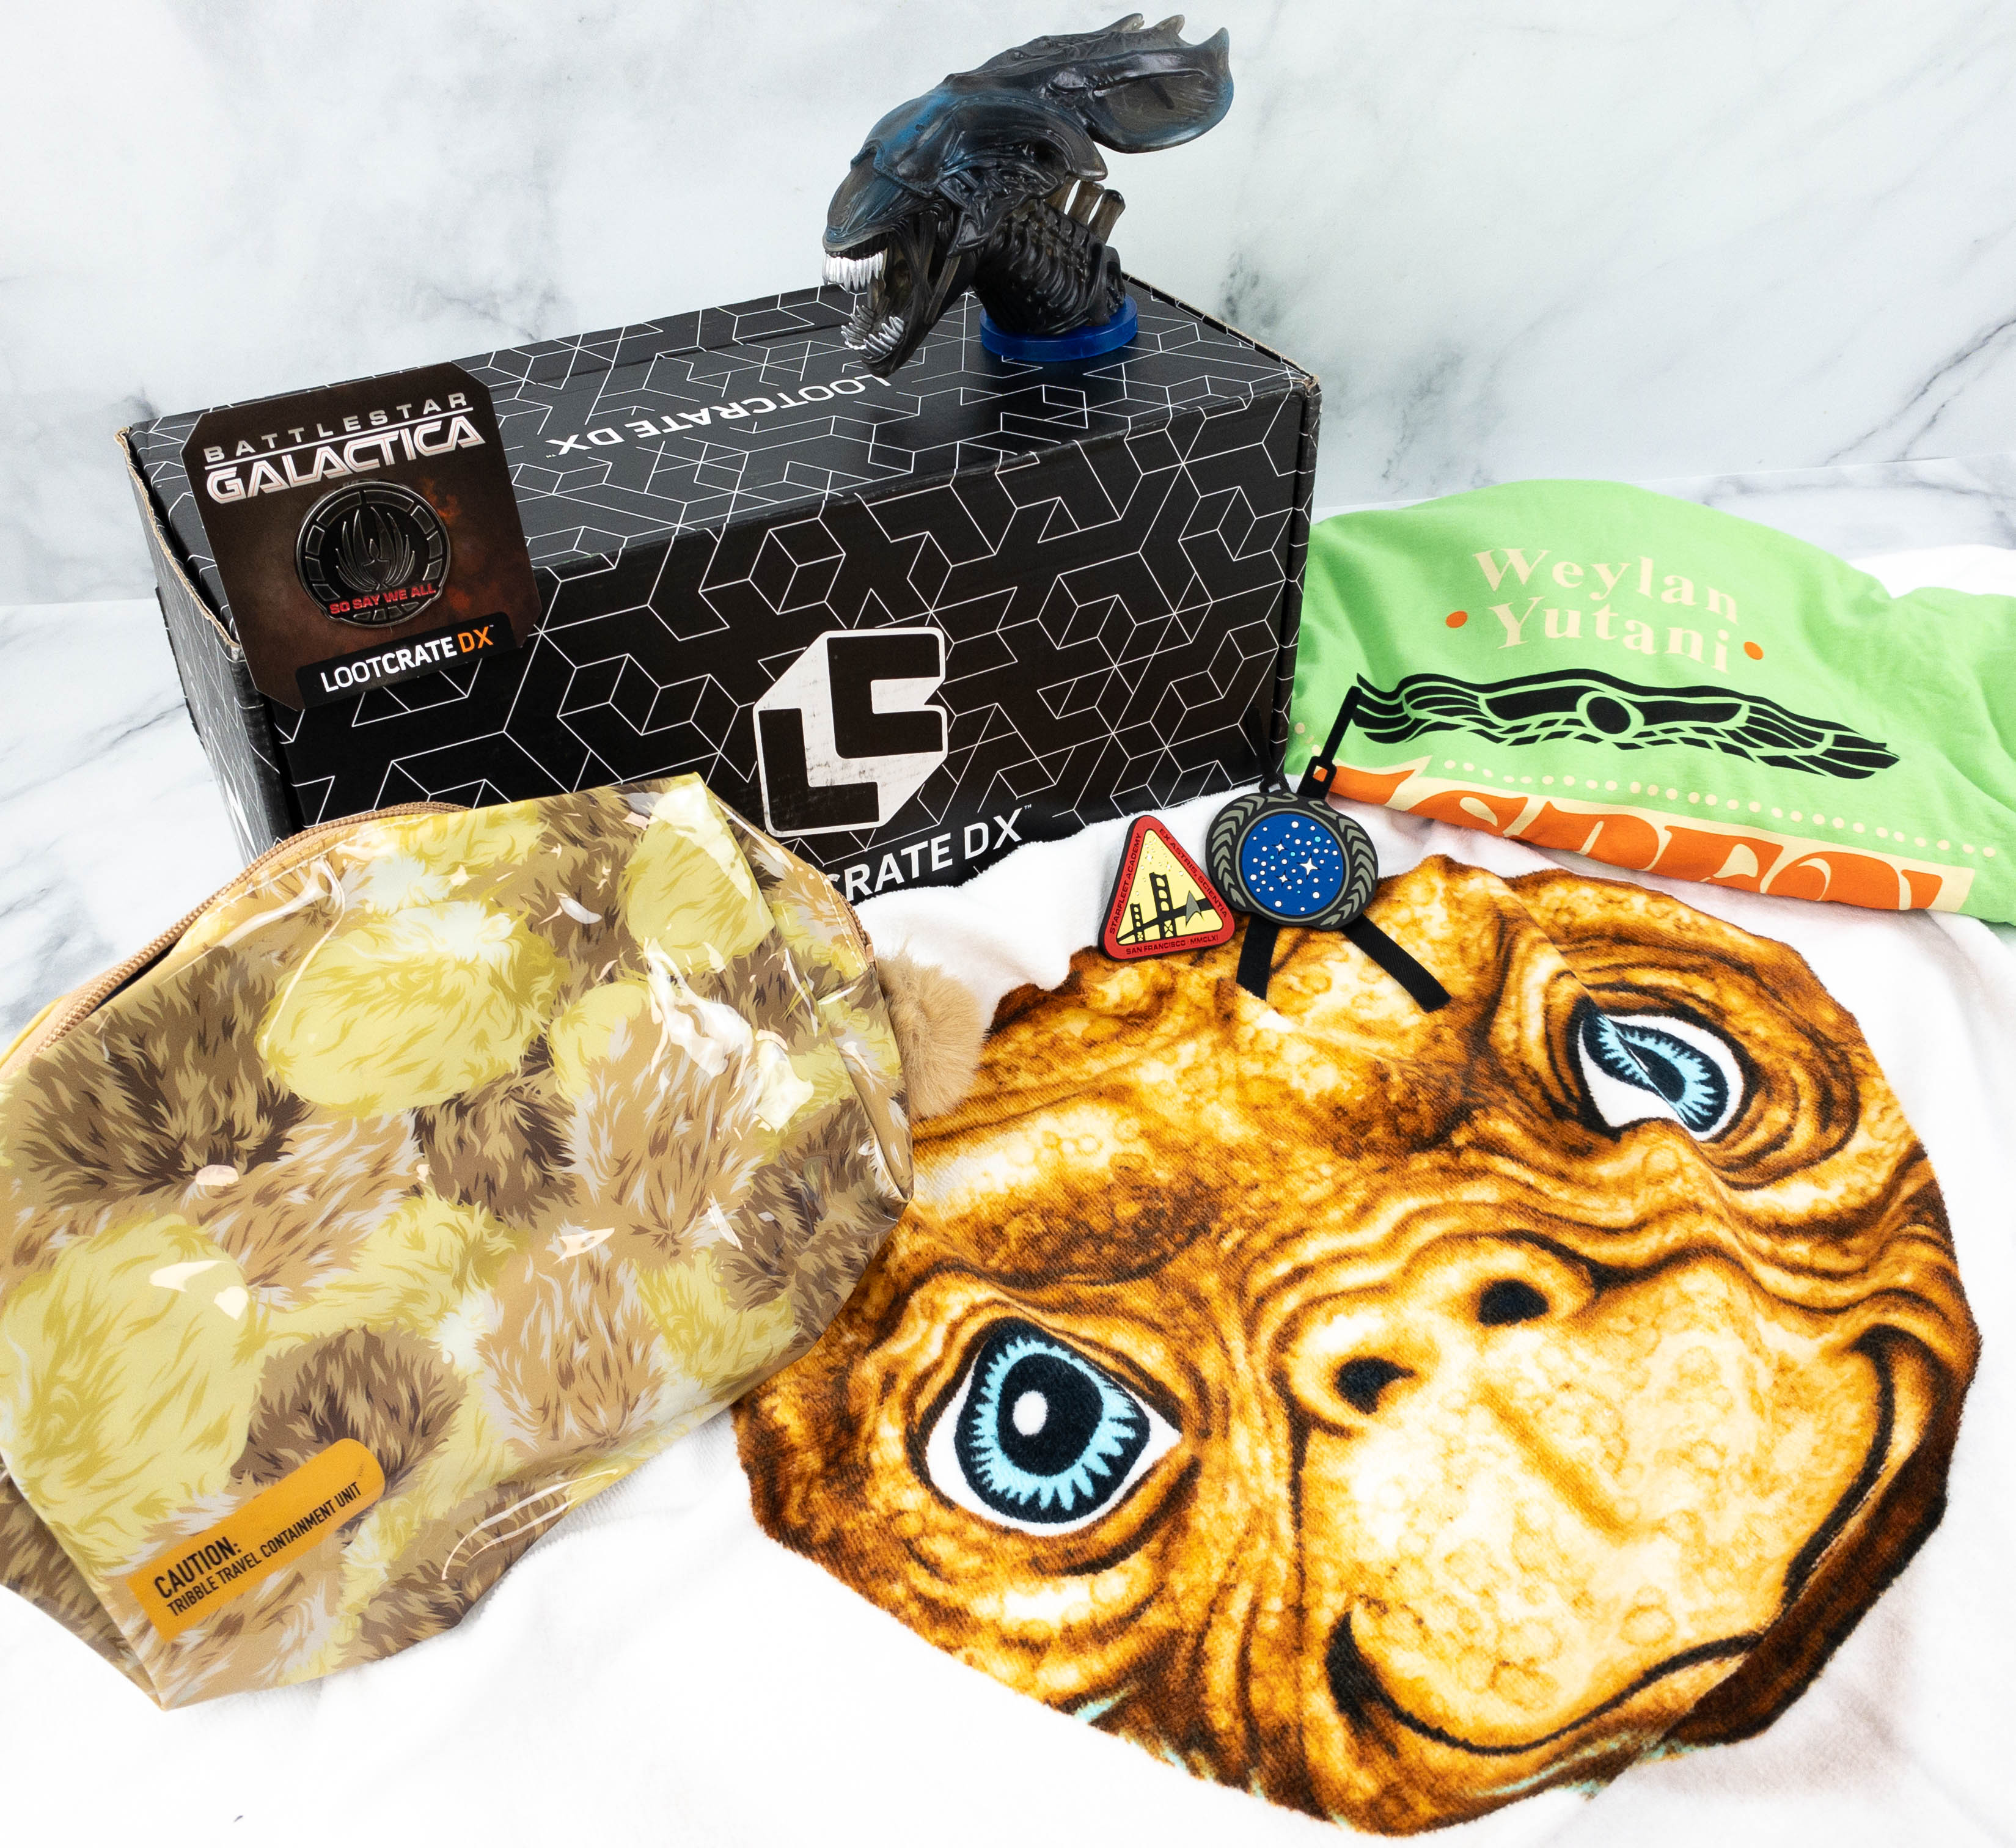 Loot Crate DX June 2021 Subscription Box Review & Coupon - Hello